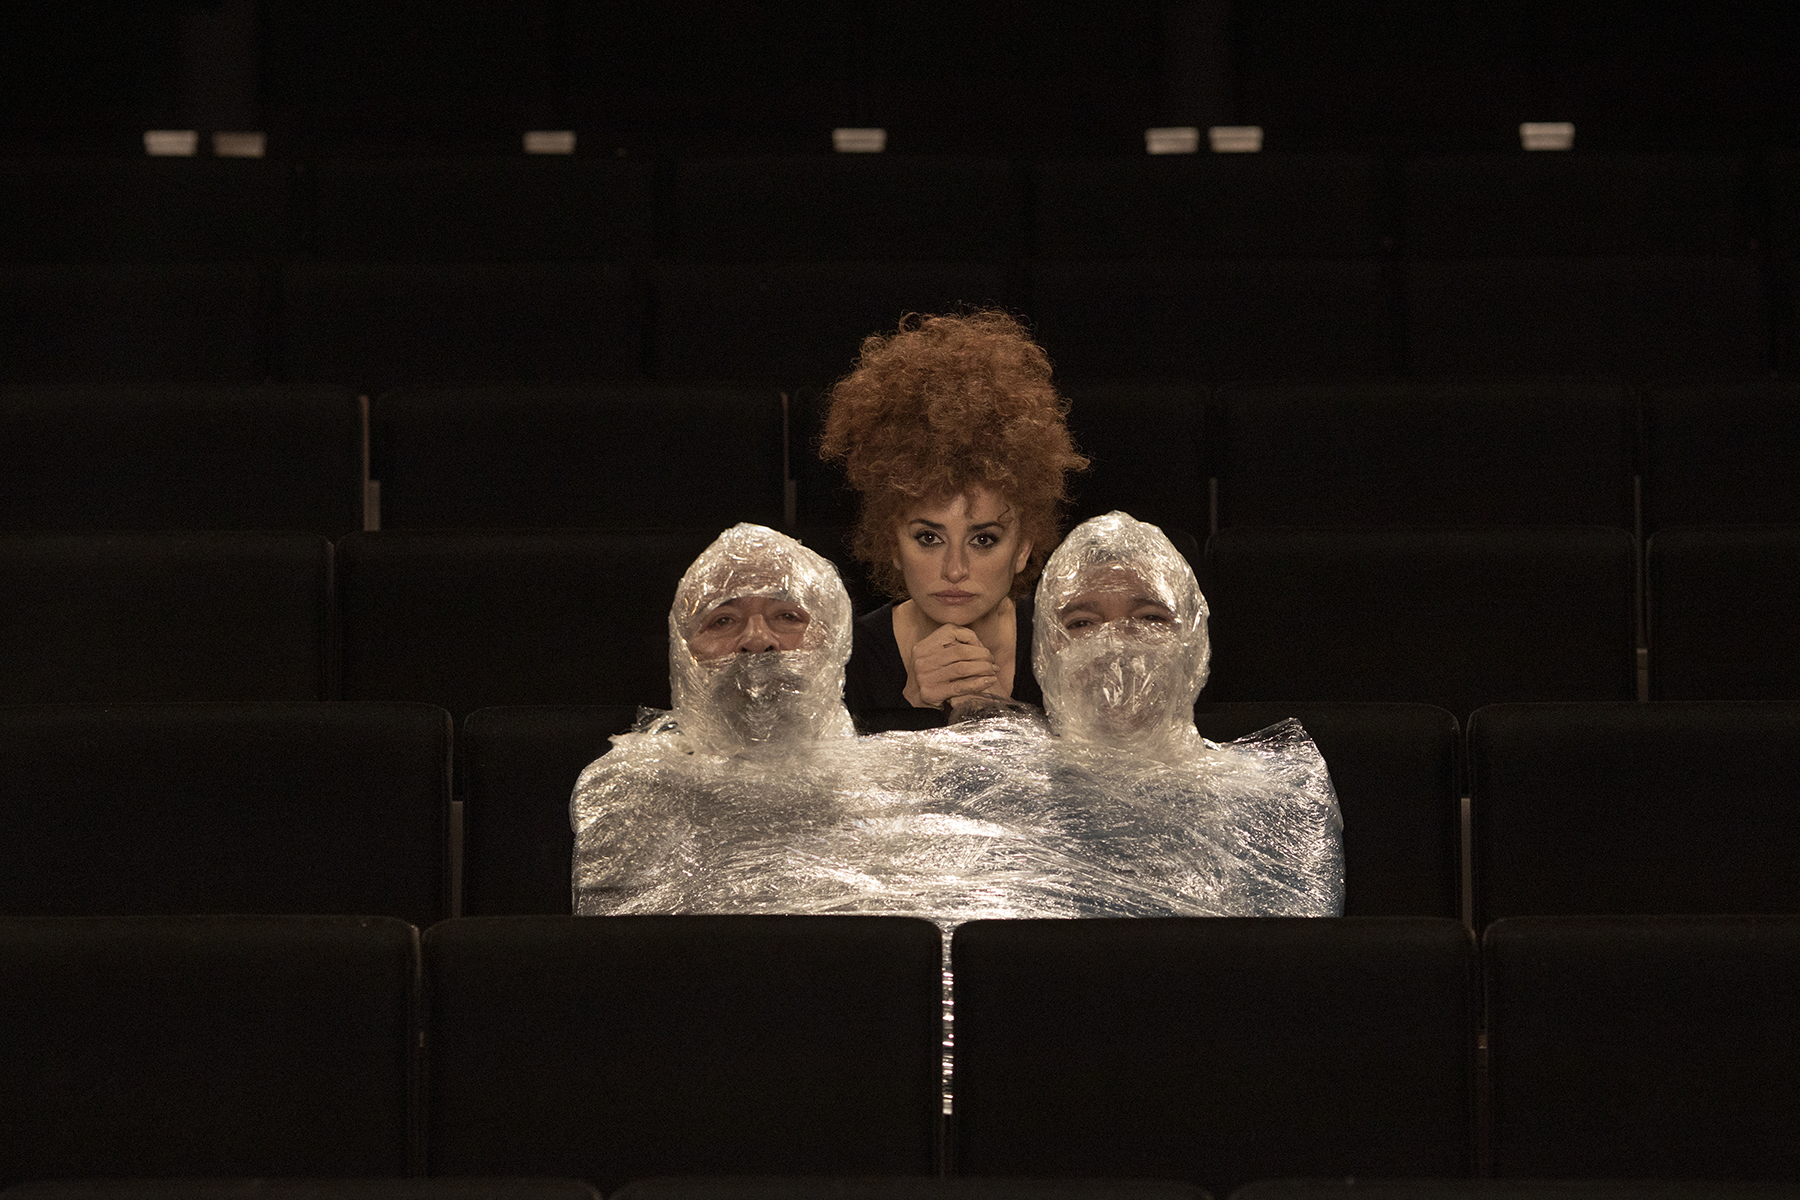 Two men wrapped in plastic like mummies, woman with curly hair between them in dark auditorium seats